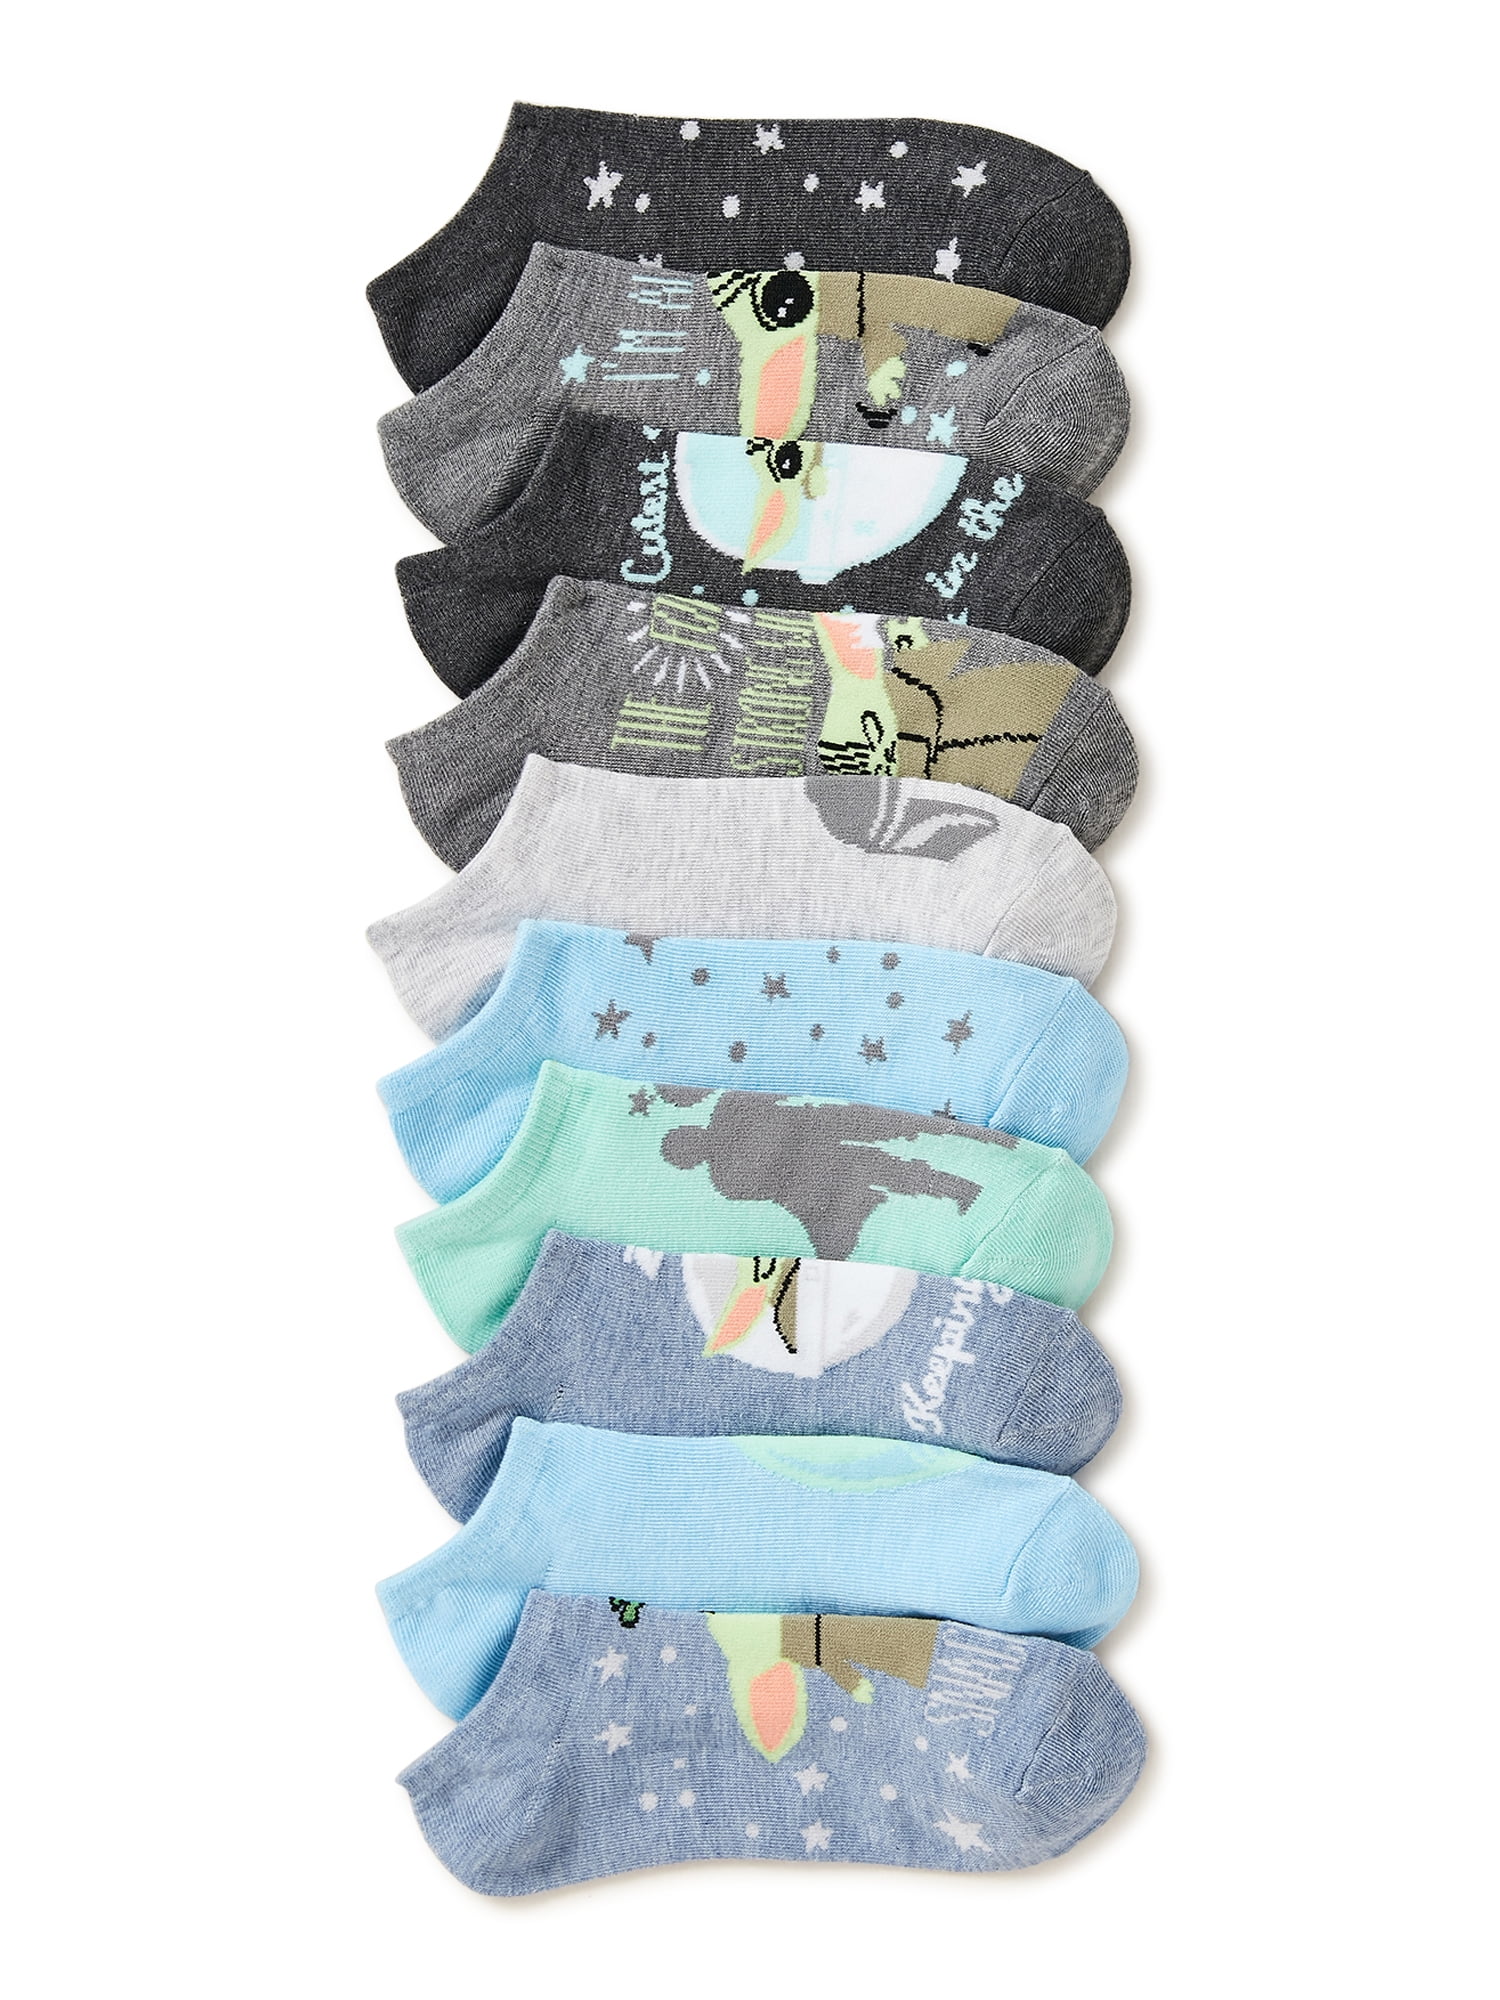 1 pair Mens Socks with Team Minion detail in Black or Navy sizes 6-11